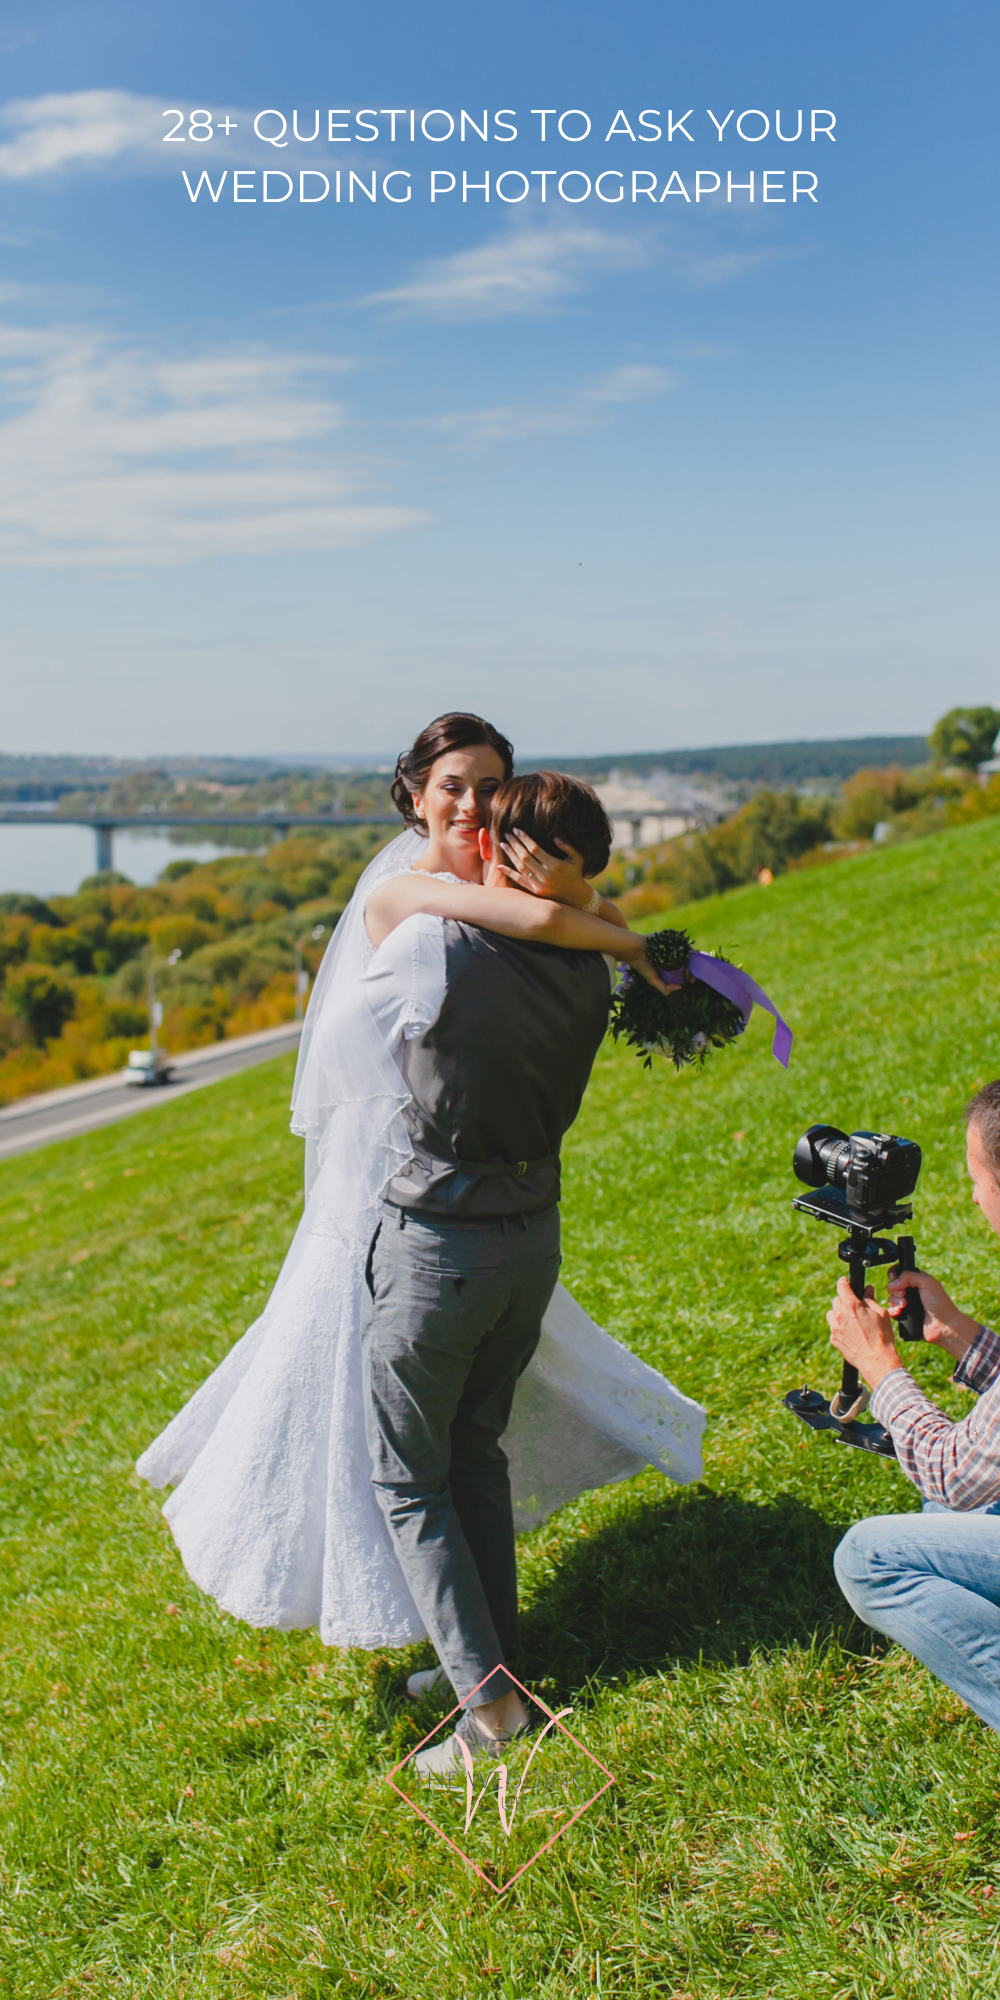 7. 28+ Questions to ask your Wedding Photographer